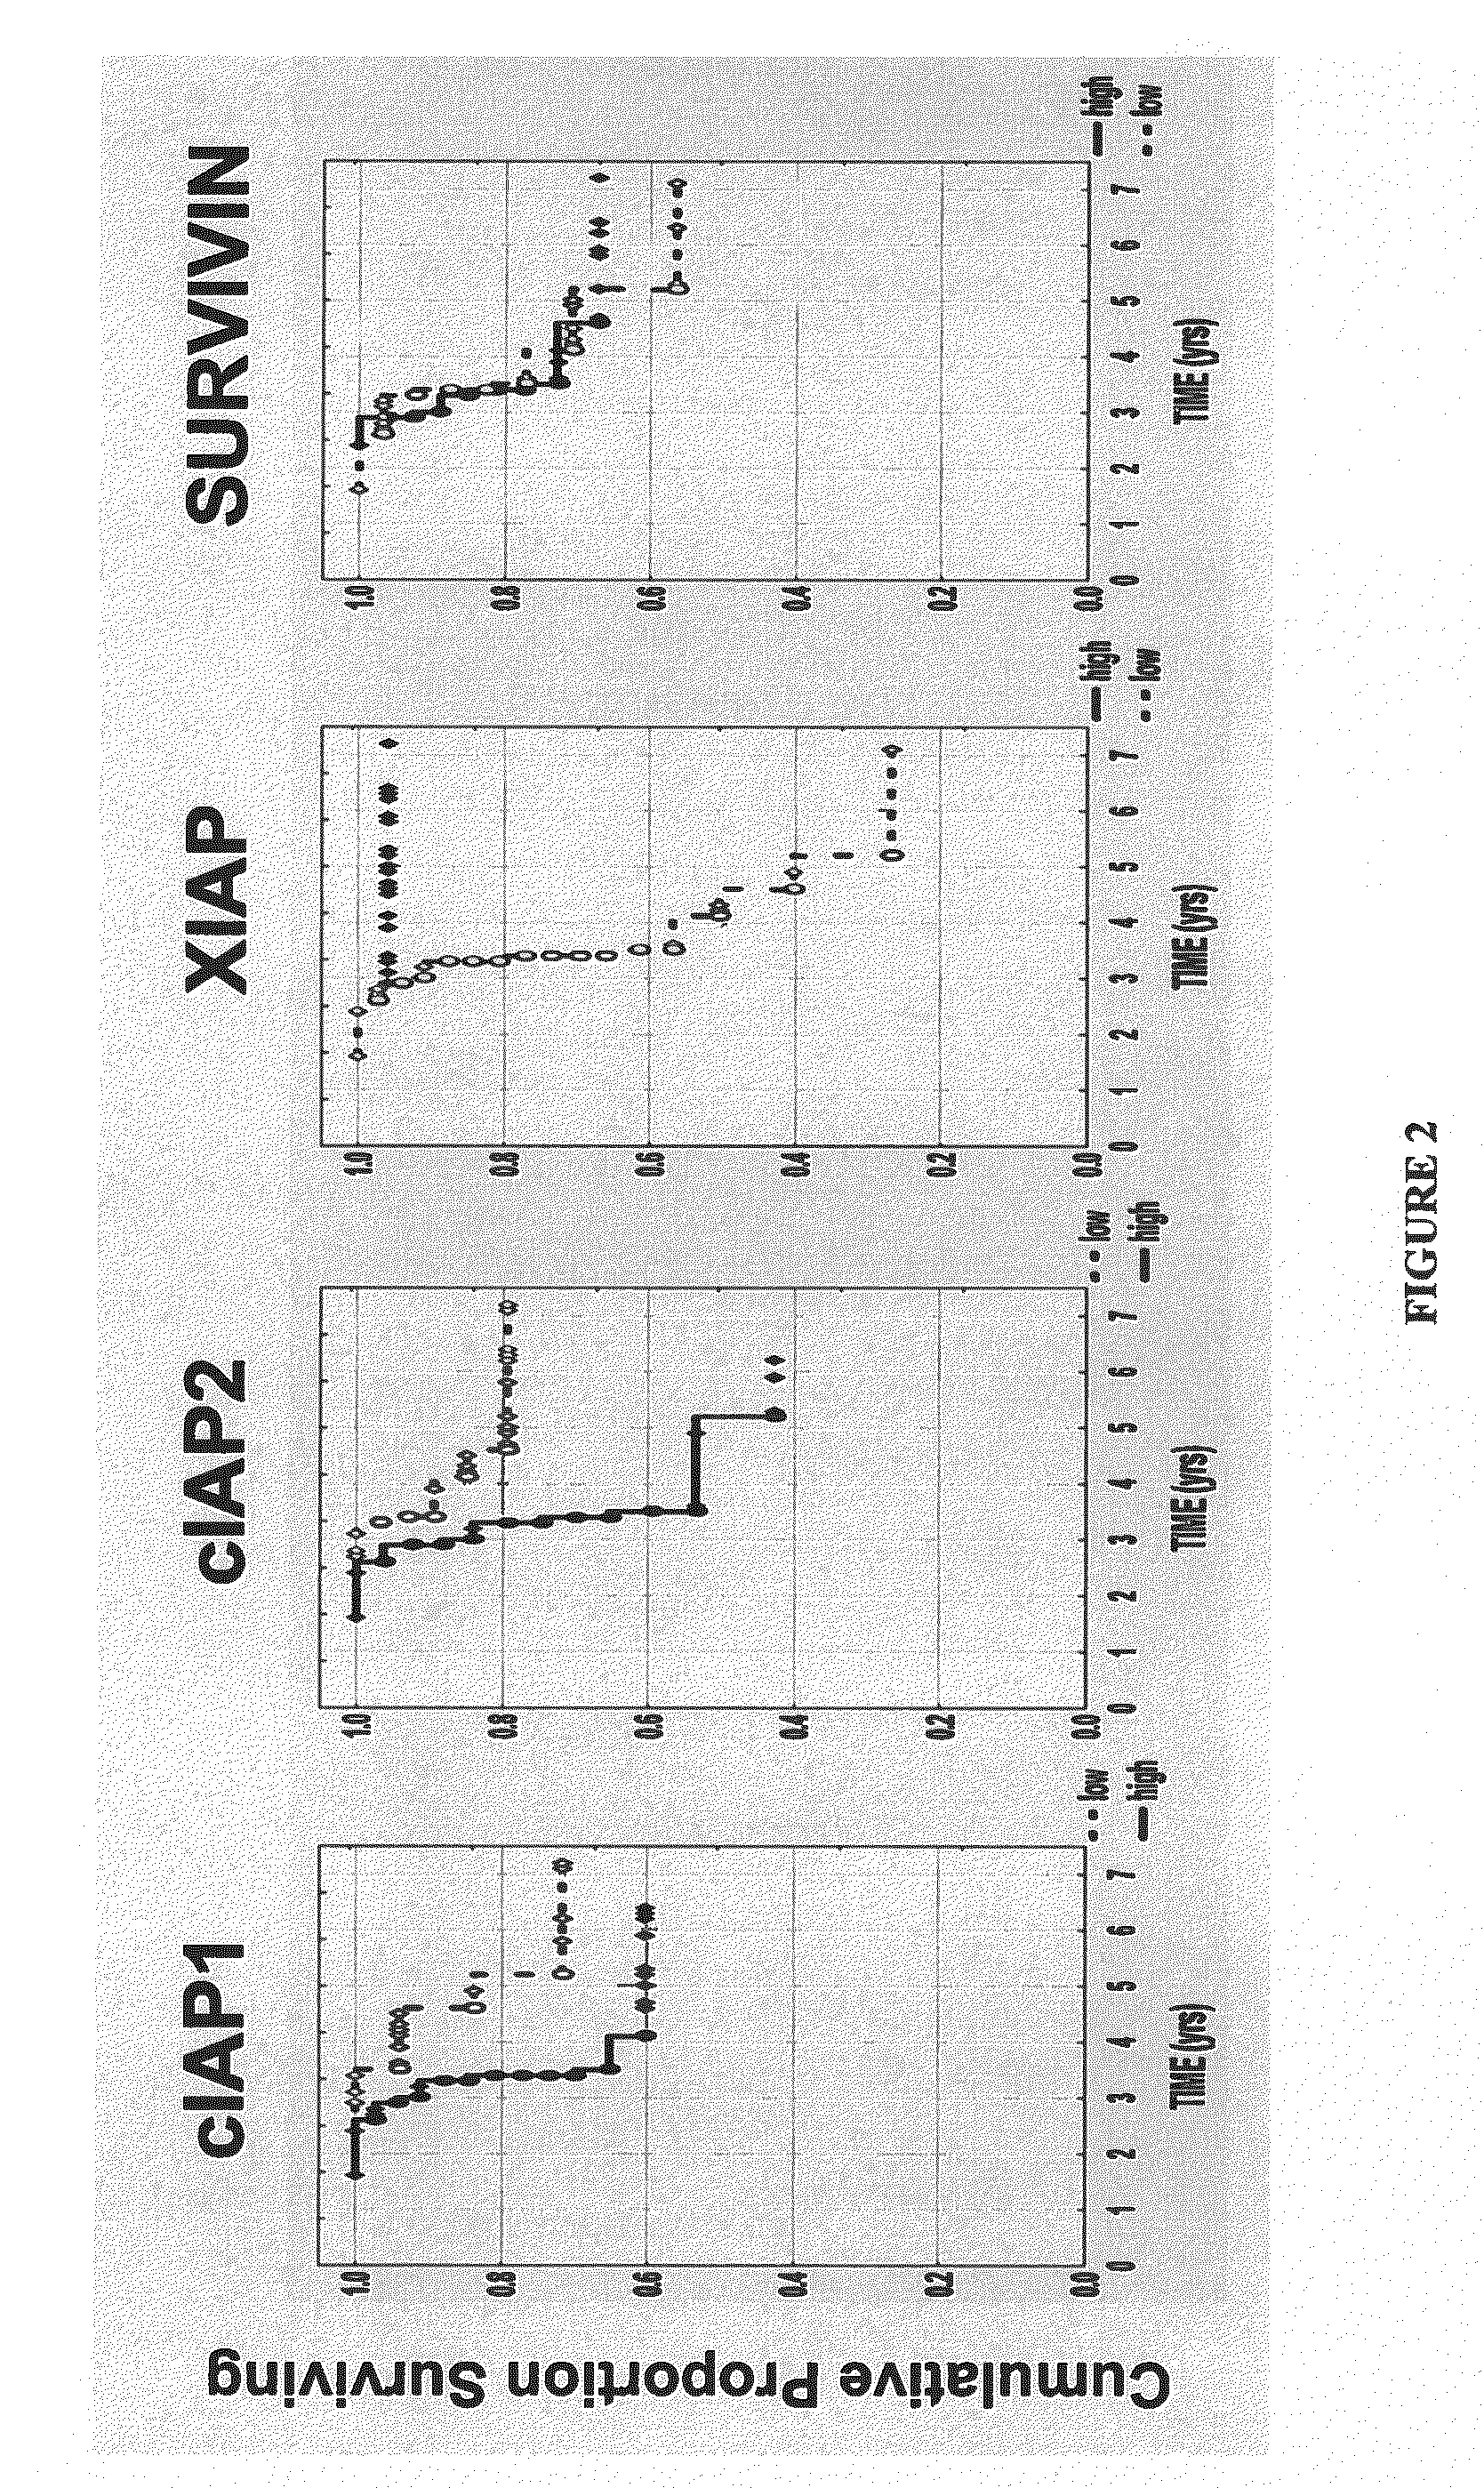 Methods for determining the prognosis for patients with a prostate neoplastic condition